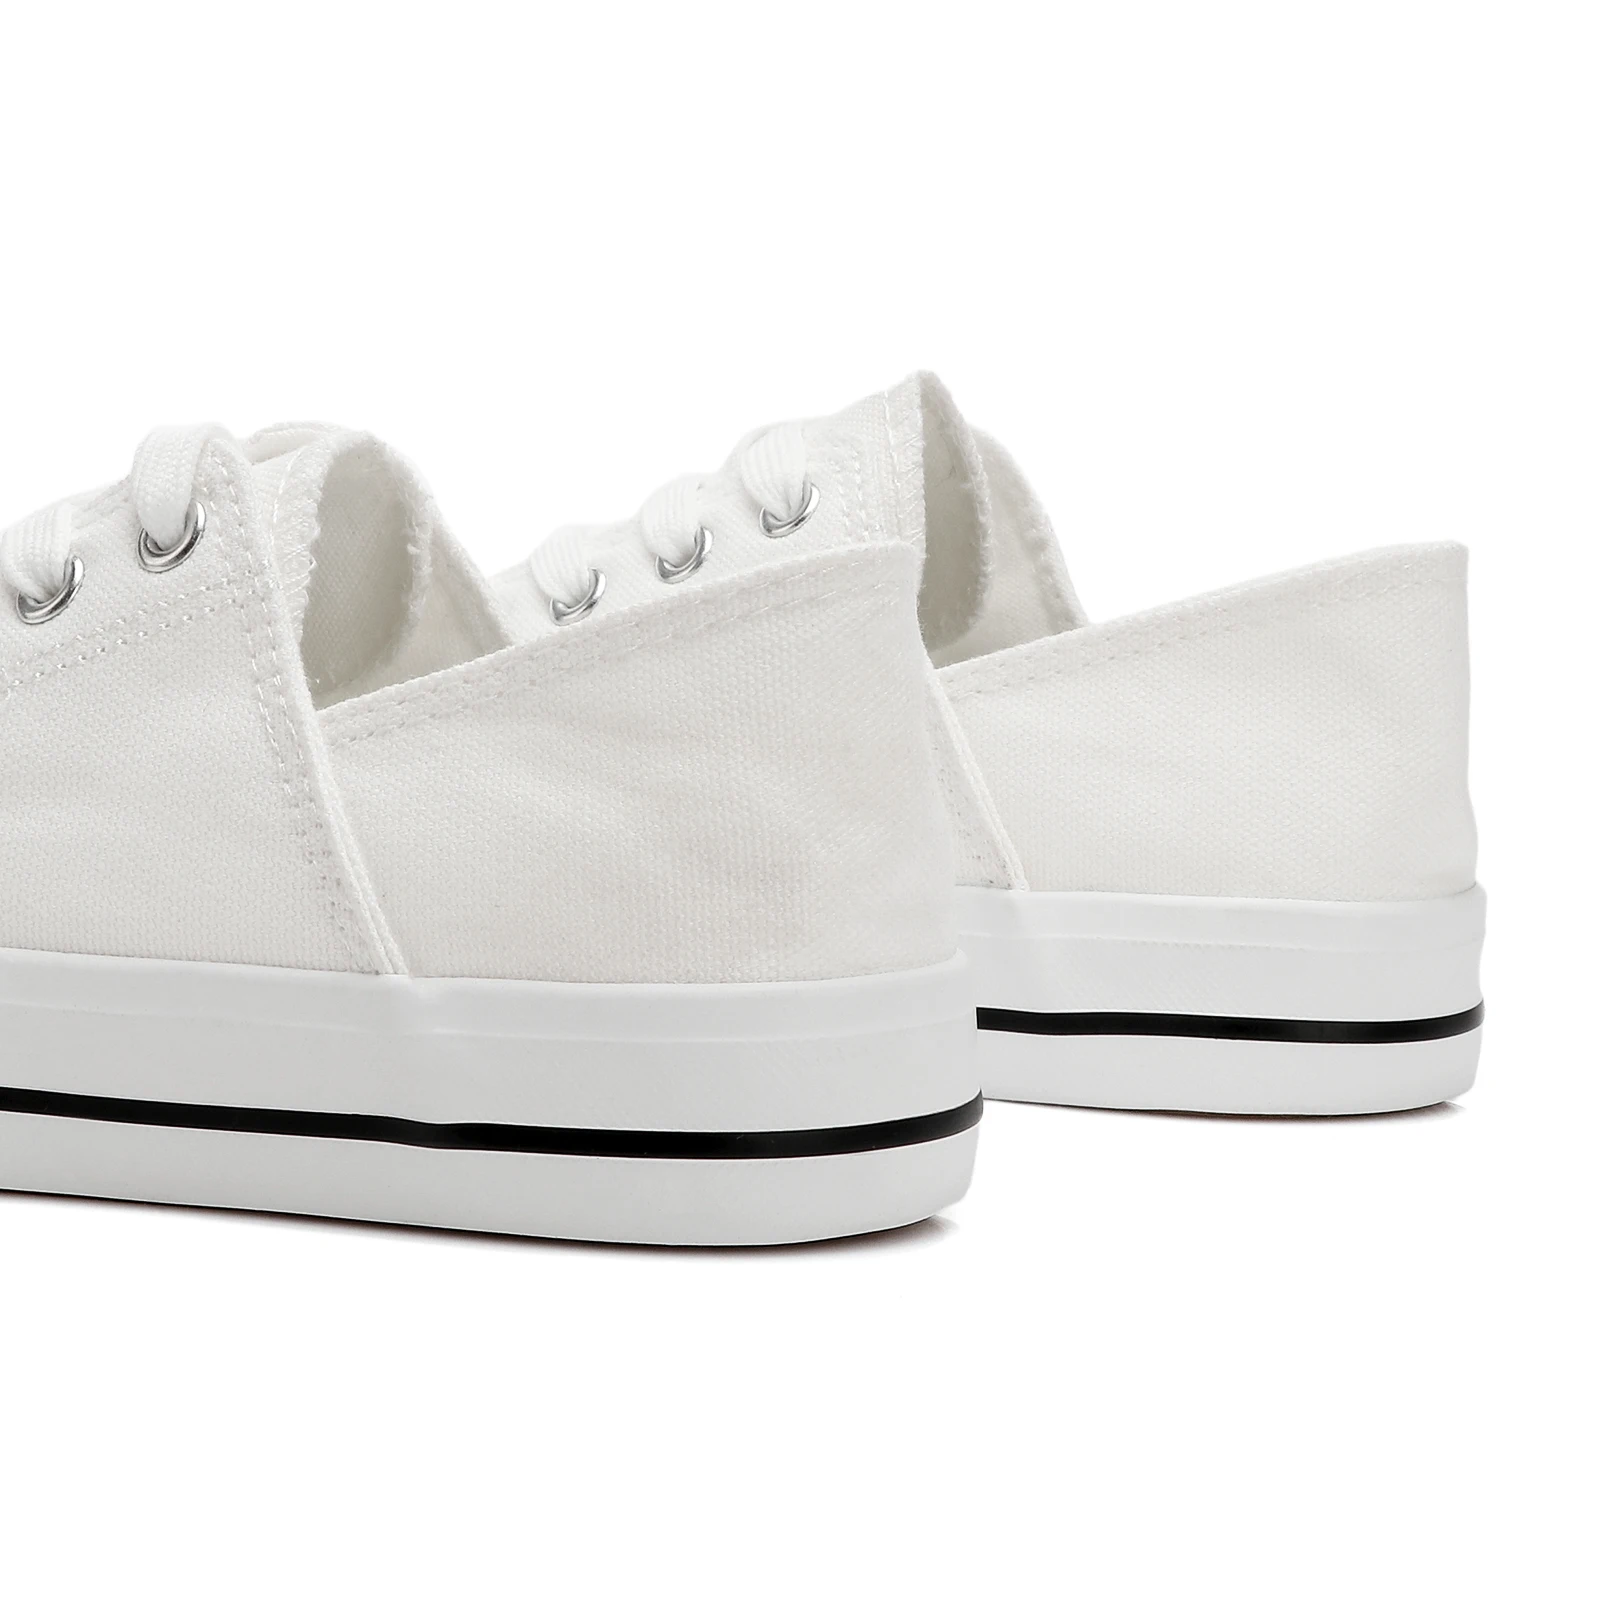 Factory custom canvas shoes Classic style can be changed into sandals shoes comfortable and convenient casual shoes a slip-on